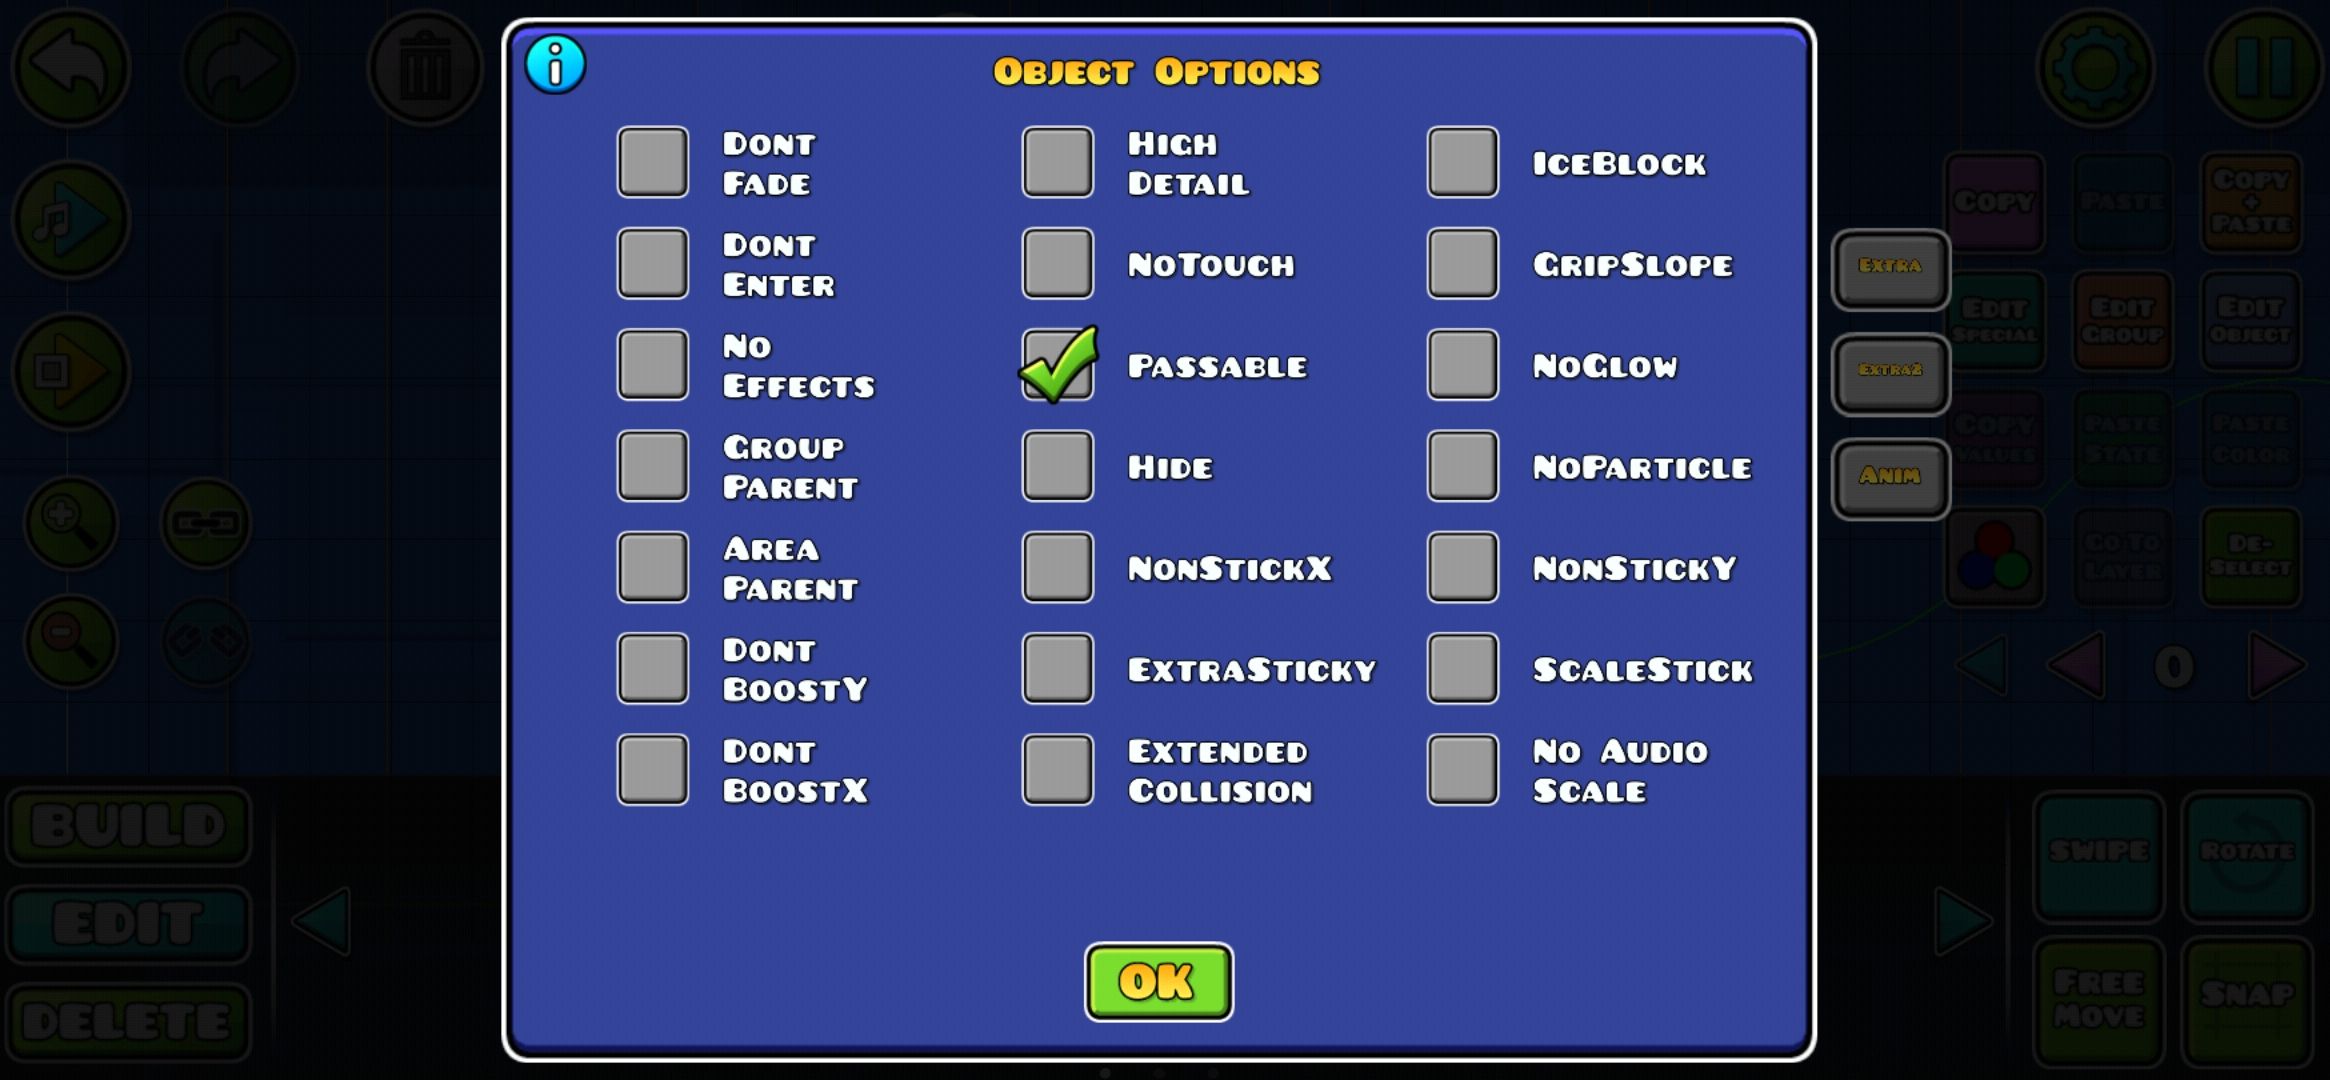 Passable option ticked in the Object Options menu of Geometry Dash.